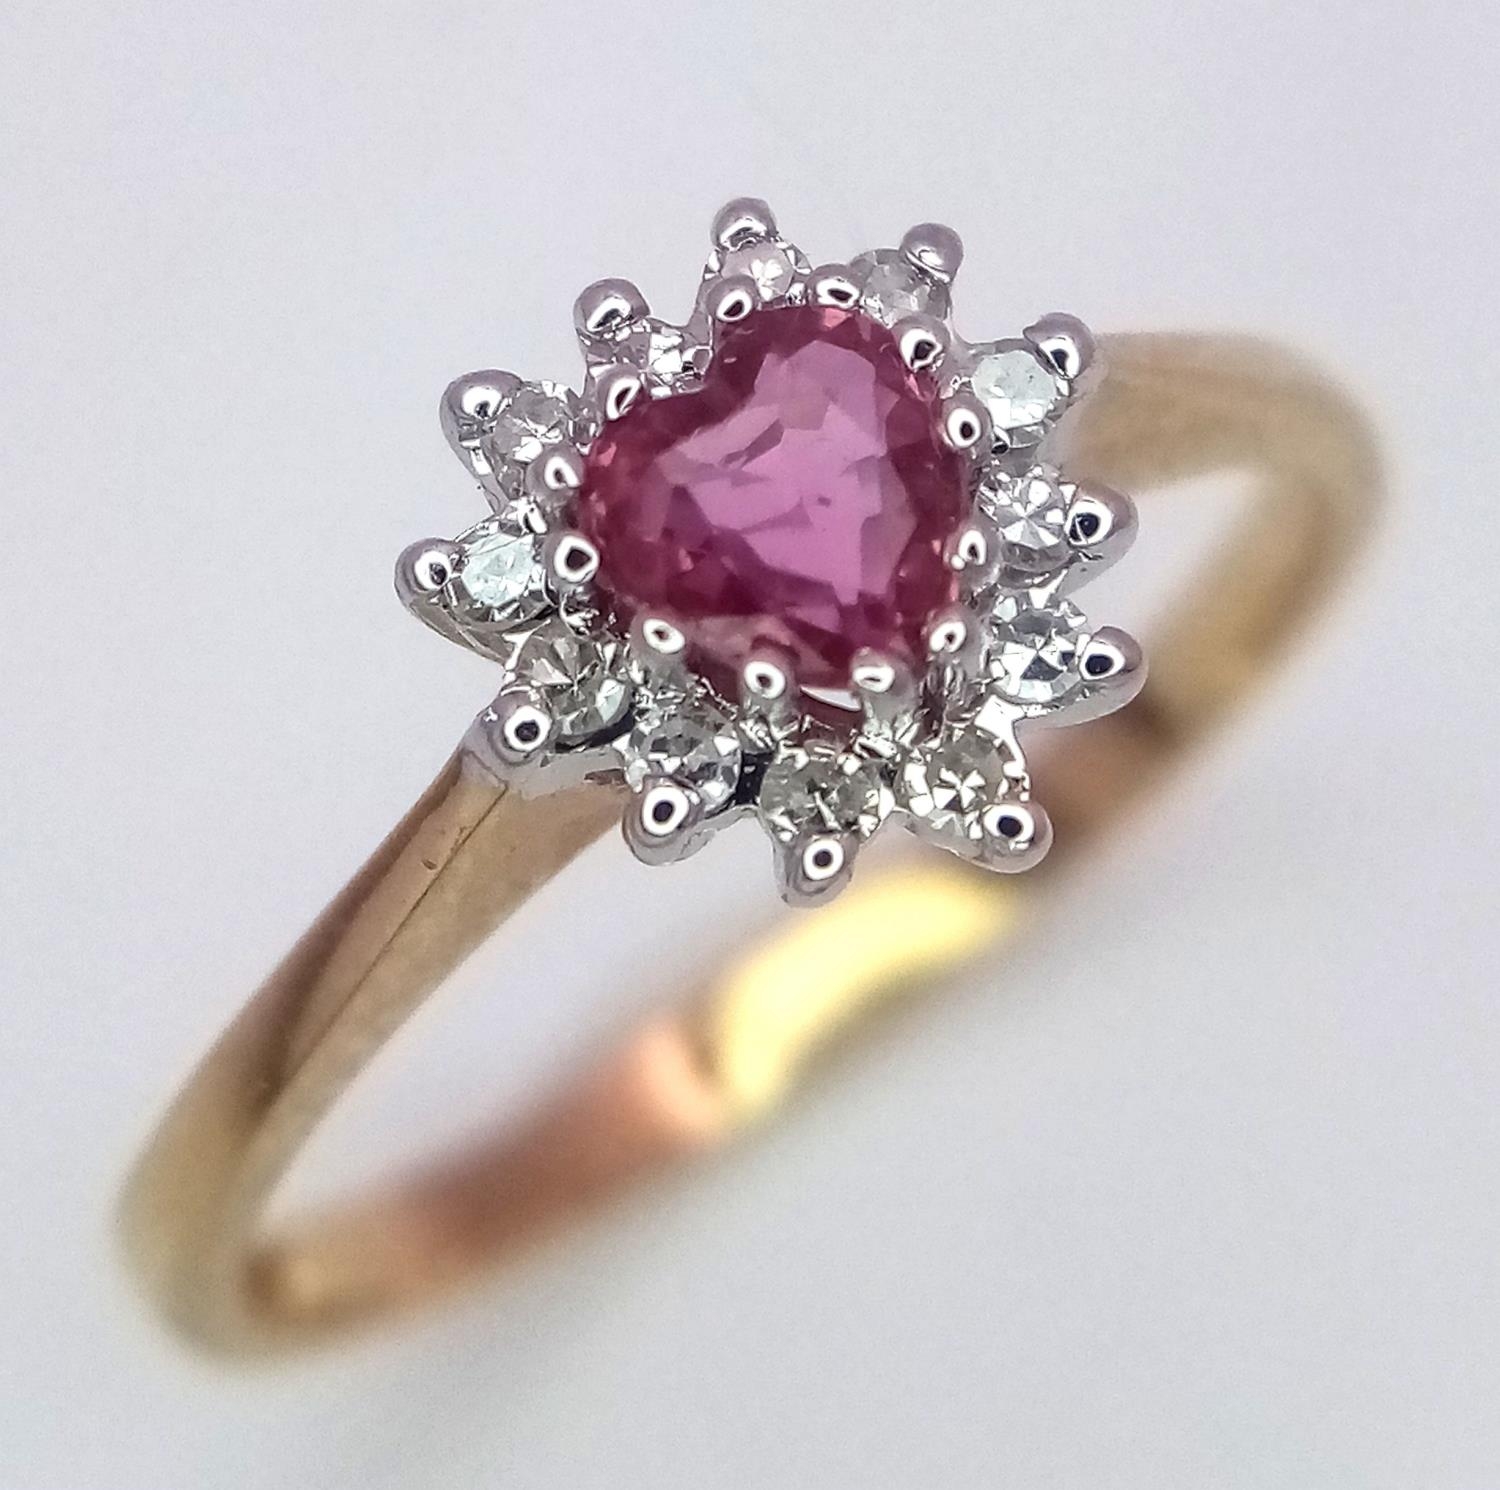 A 9K YELLOW GOLD DIAMOND & PINK SAPPHIRE HEART RING 1.6G SIZE N. ref: SPAS 9010